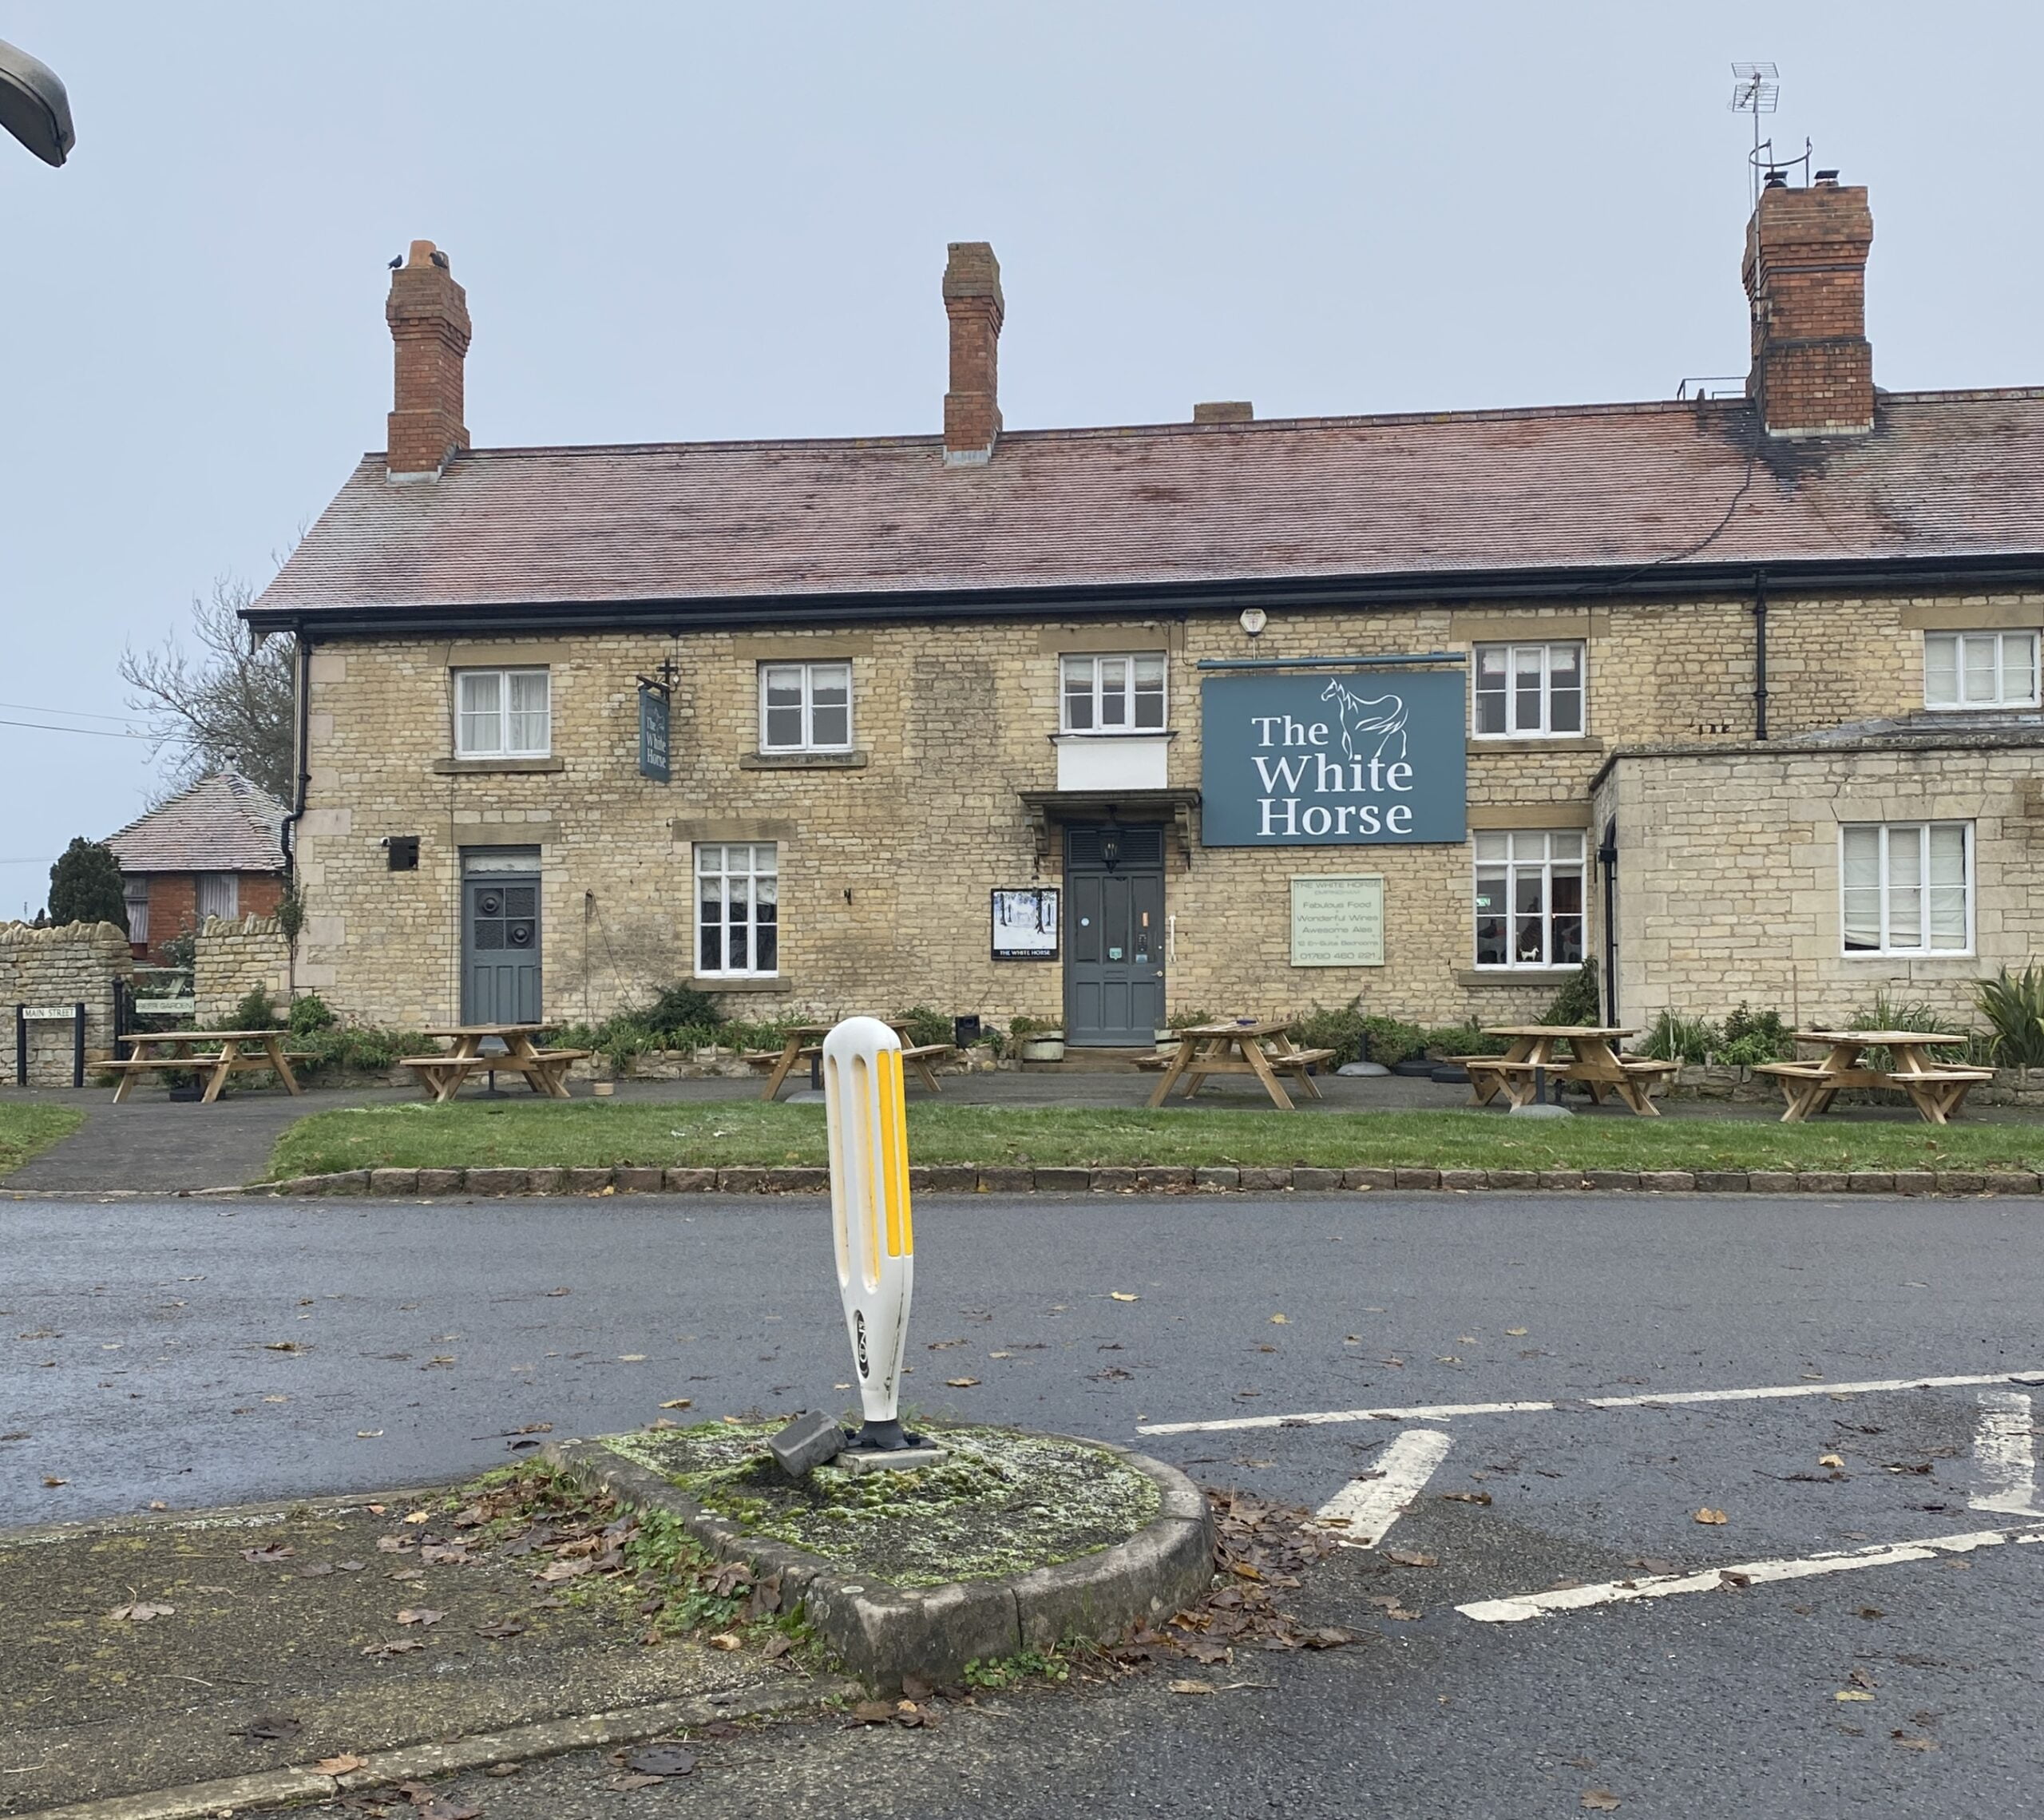 The White Horse at Empingham